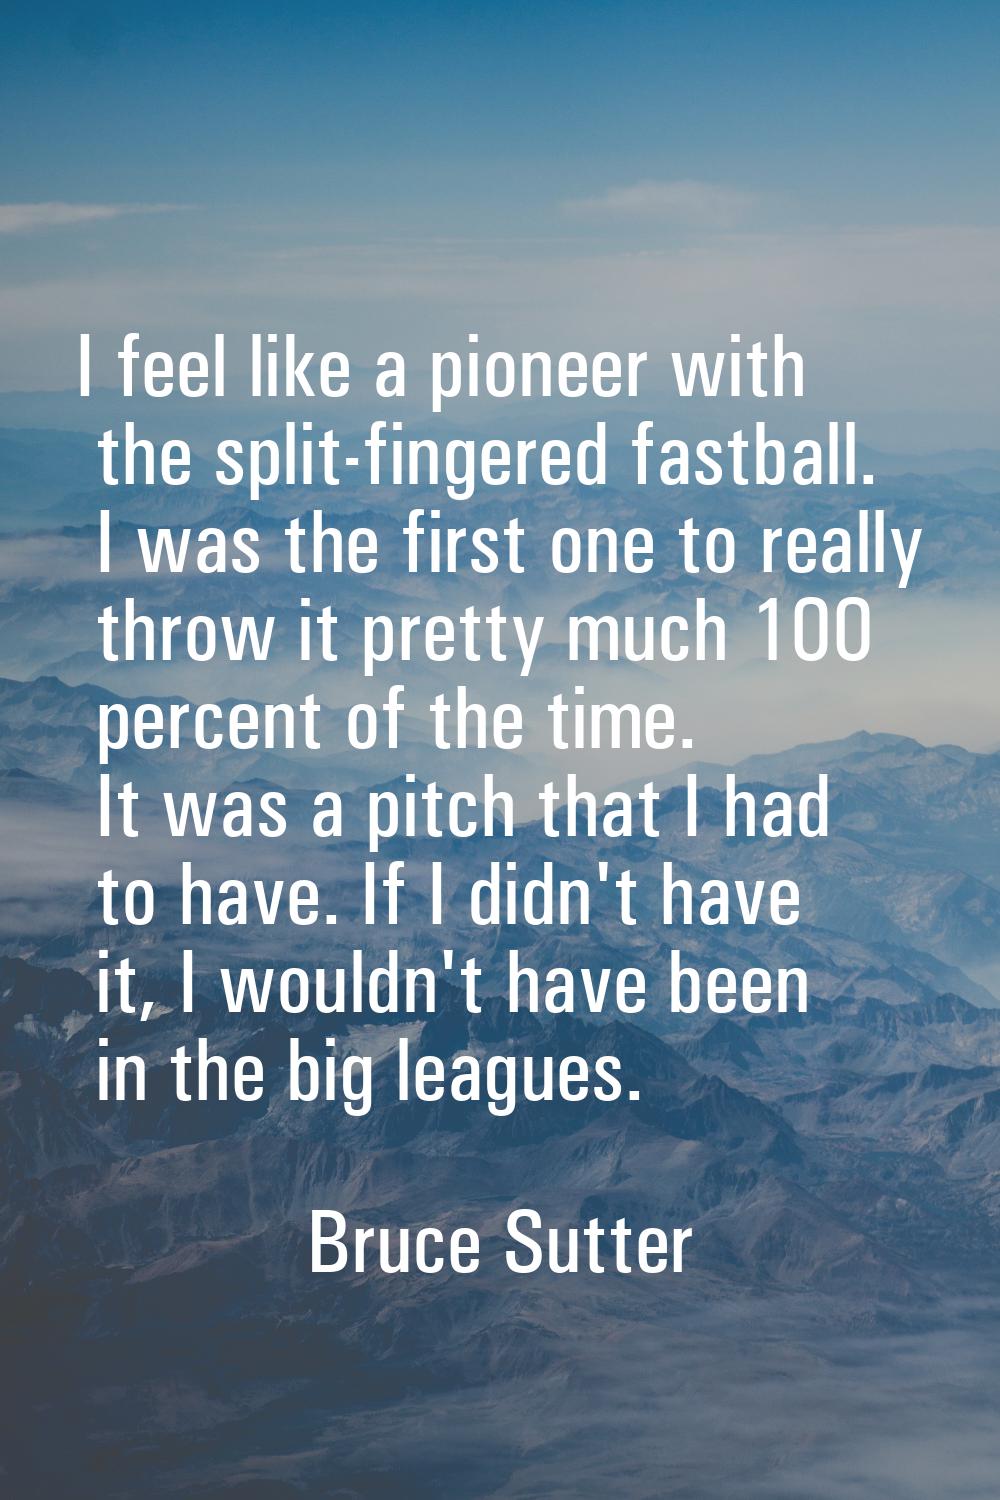 I feel like a pioneer with the split-fingered fastball. I was the first one to really throw it pret